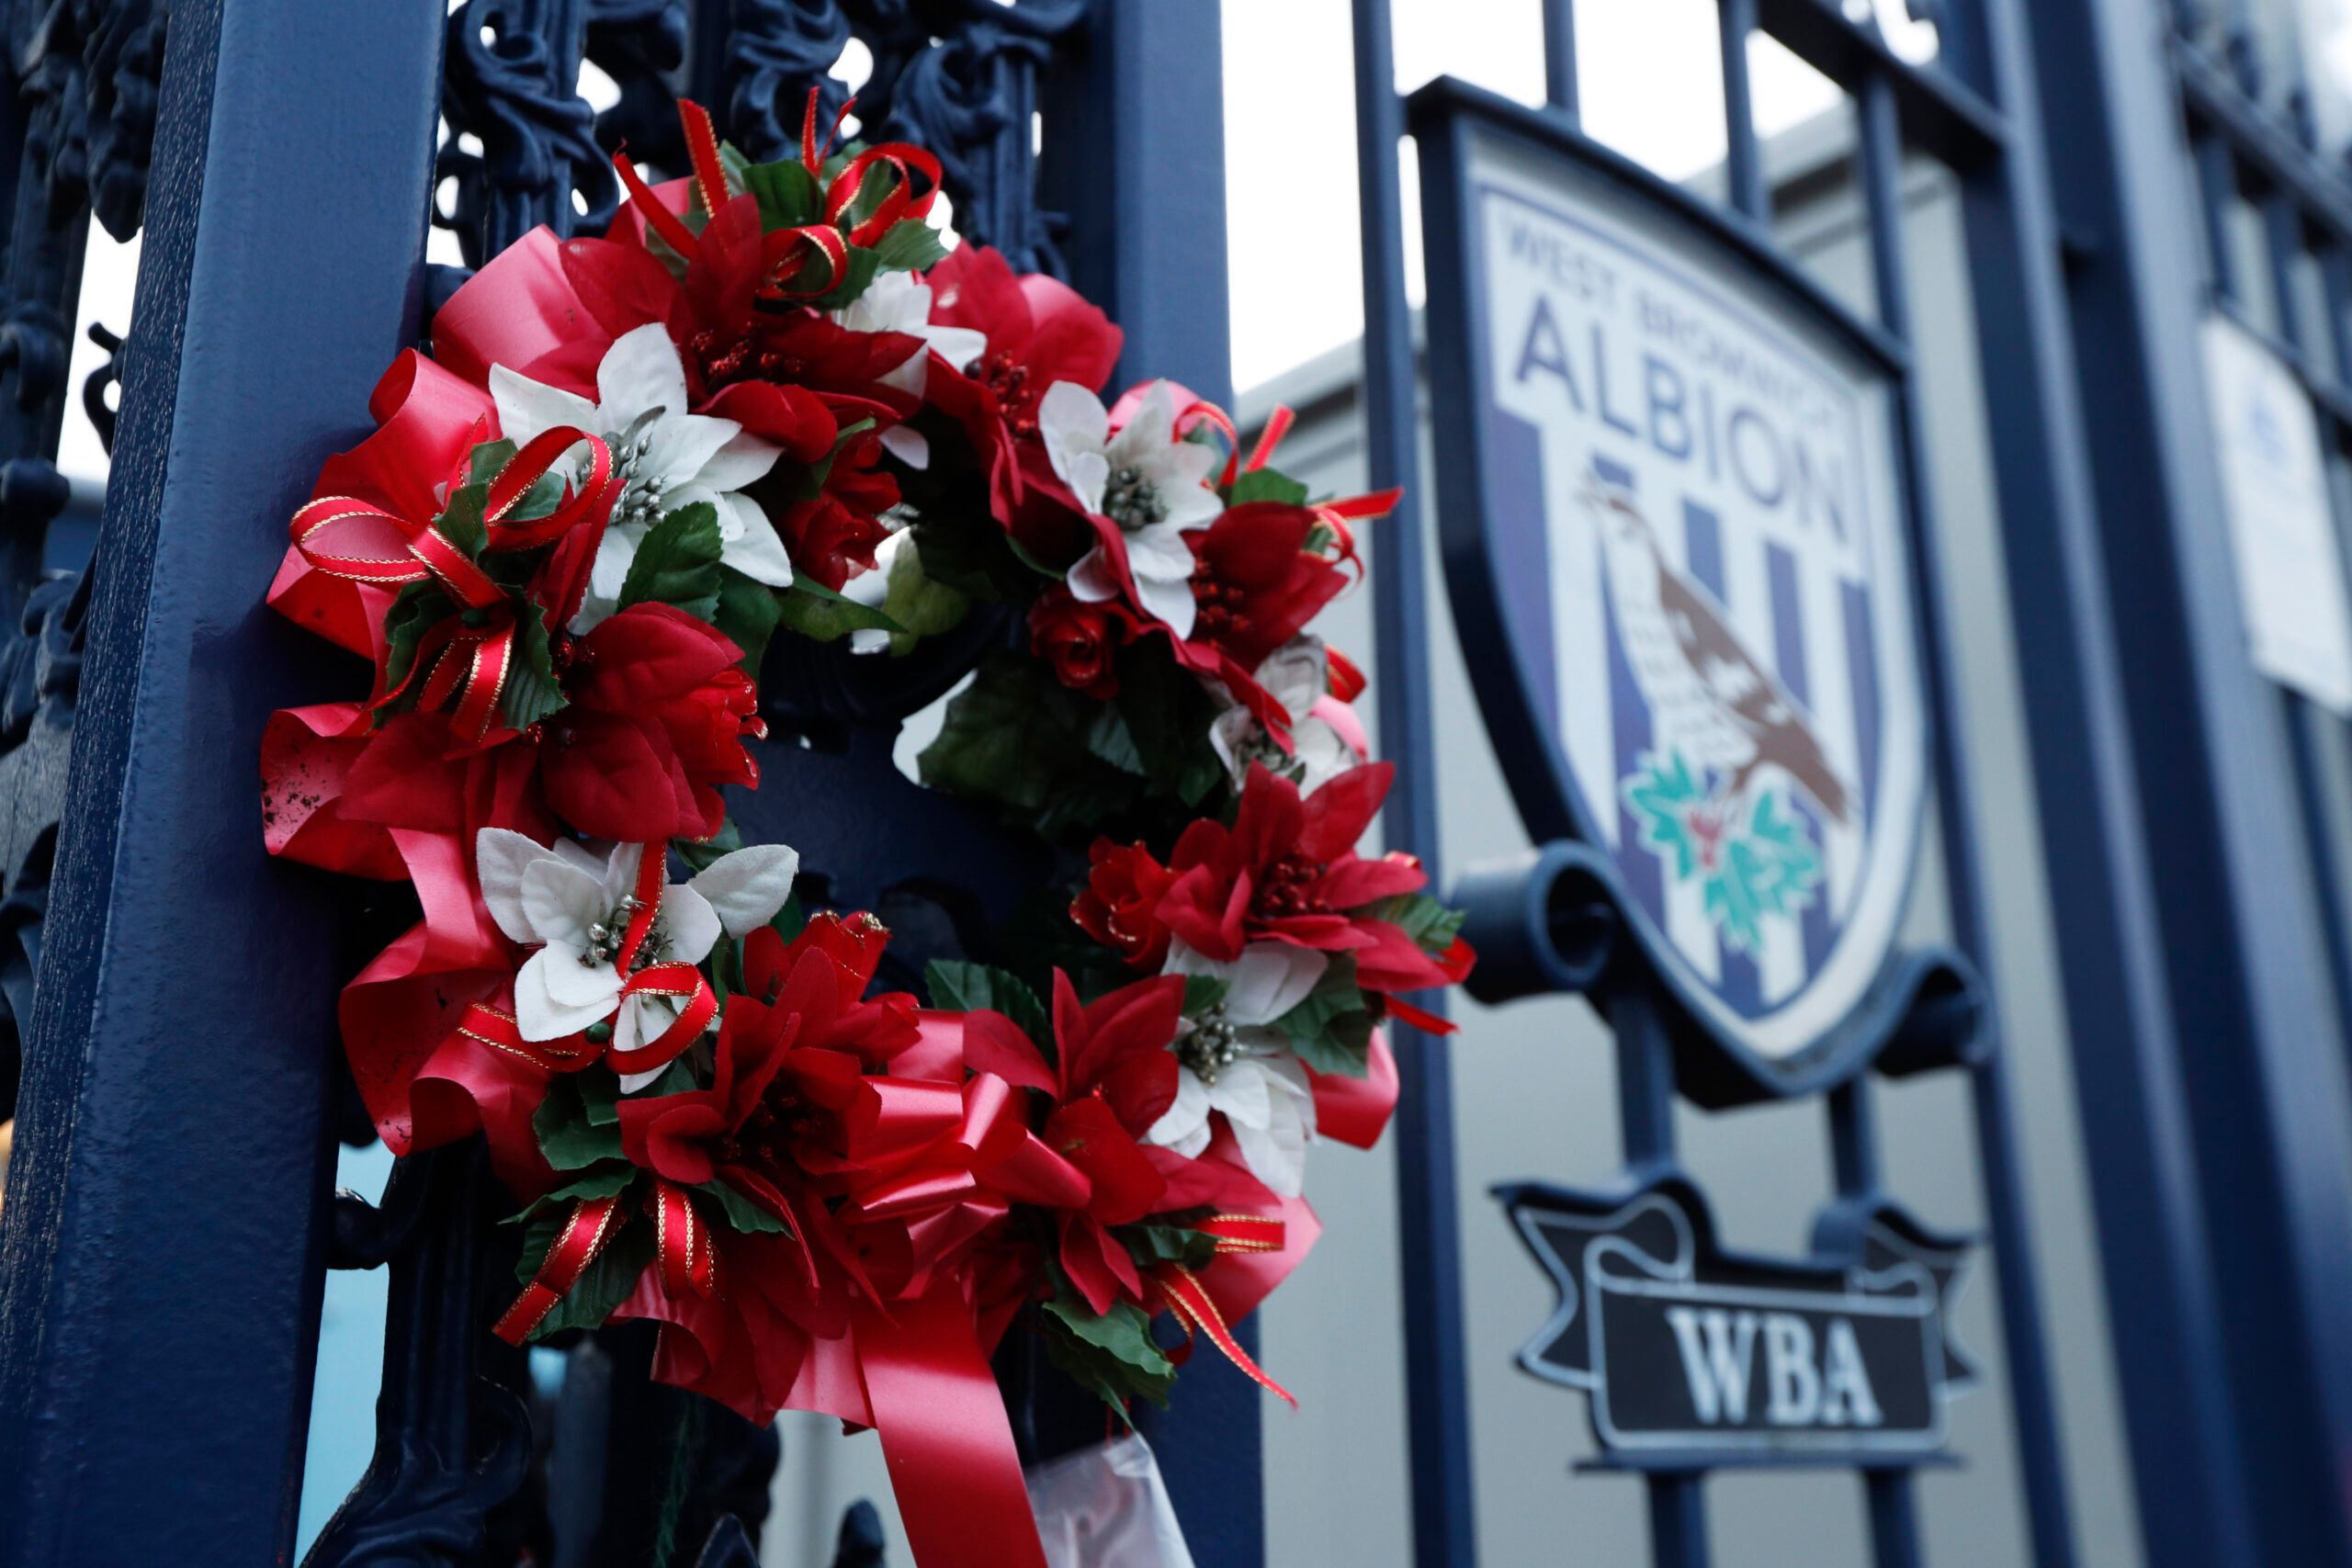 Britain Football Soccer - West Bromwich Albion v Manchester United - Premier League - The Hawthorns - 17/12/16 General view of a Christmas wreath on the gate outside the stadium before the match Action Images via Reuters / John Sibley Livepic EDITORIAL USE ONLY. No use with unauthorized audio, video, data, fixture lists, club/league logos or 